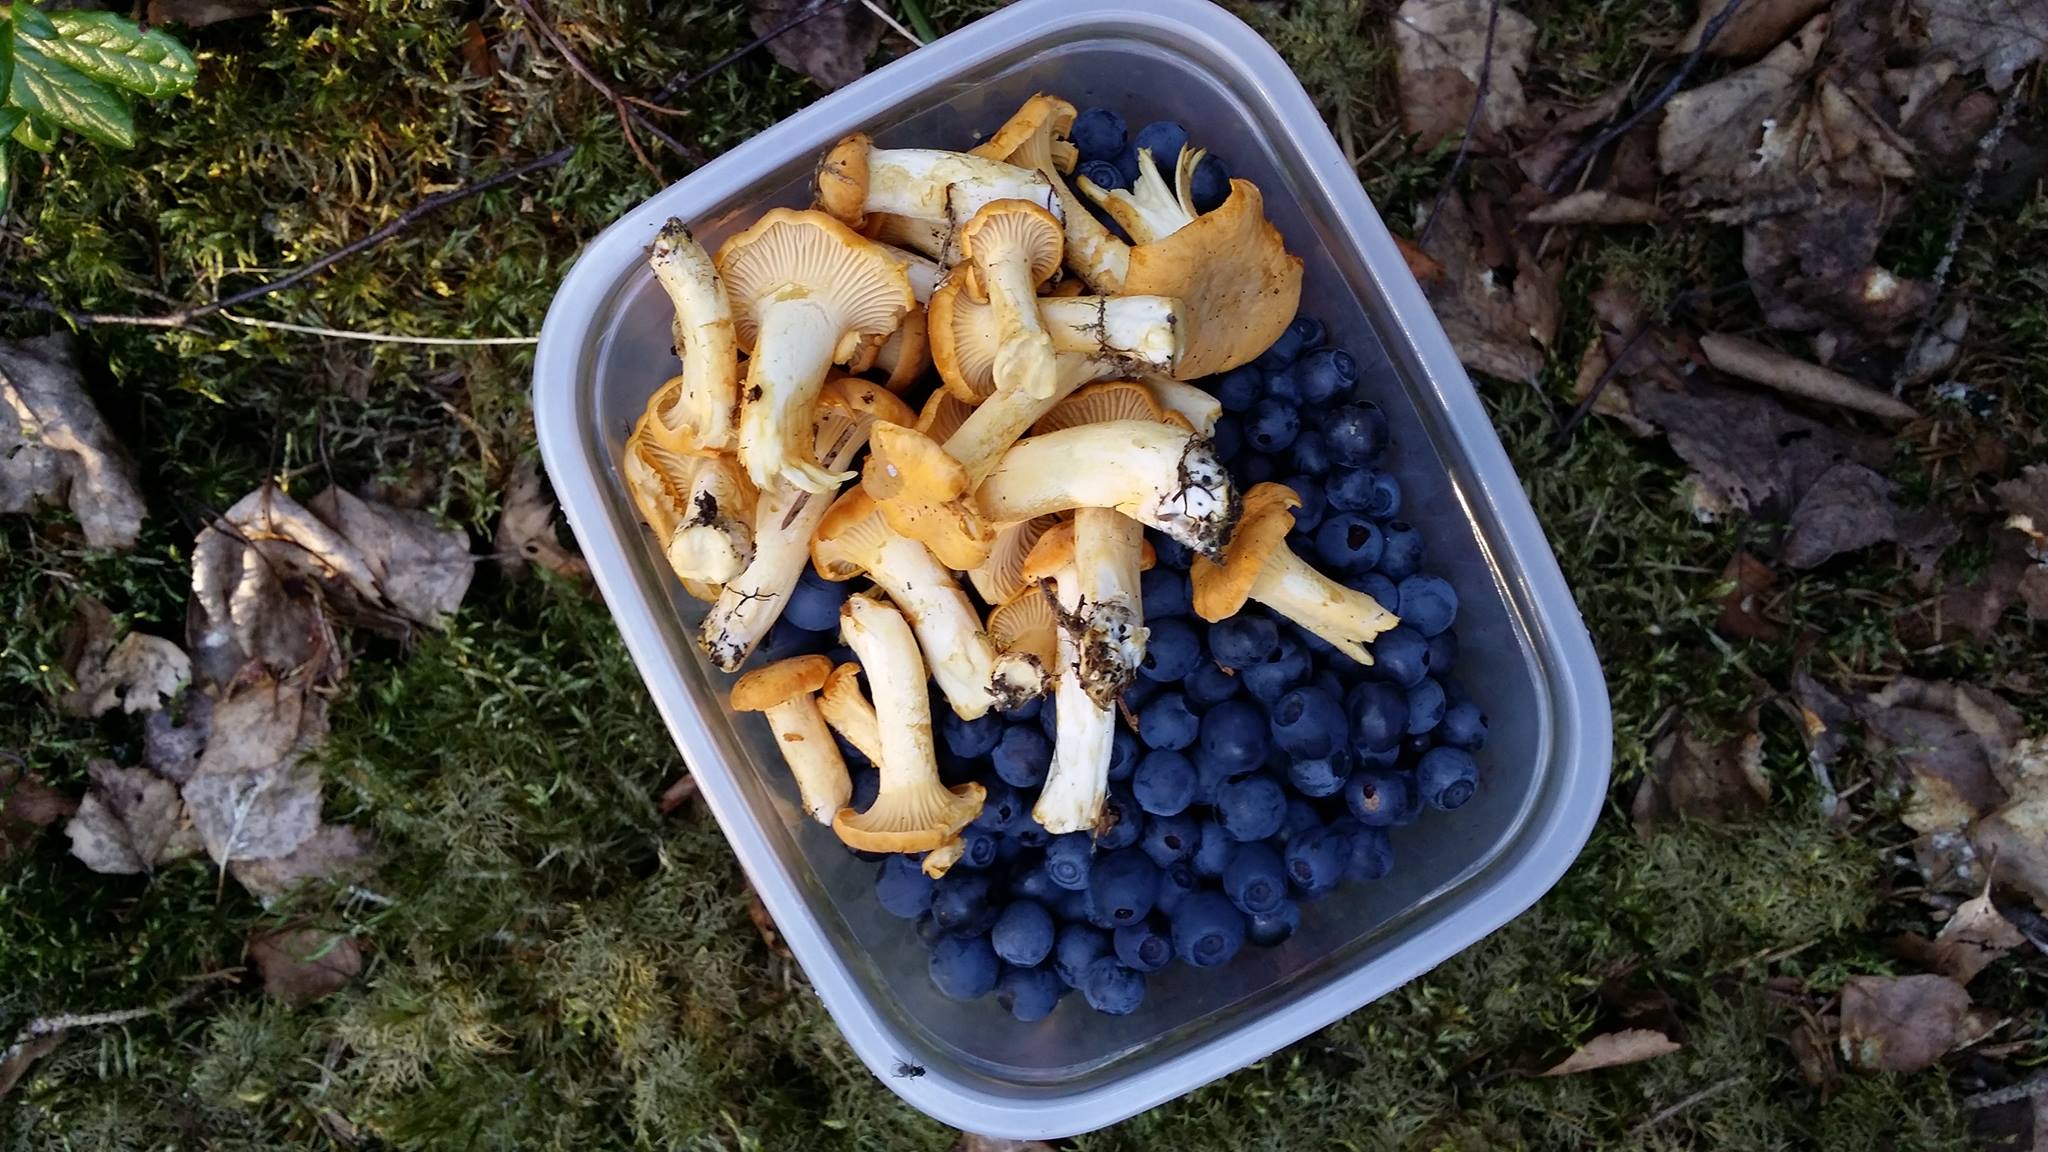 Treasures from the forest